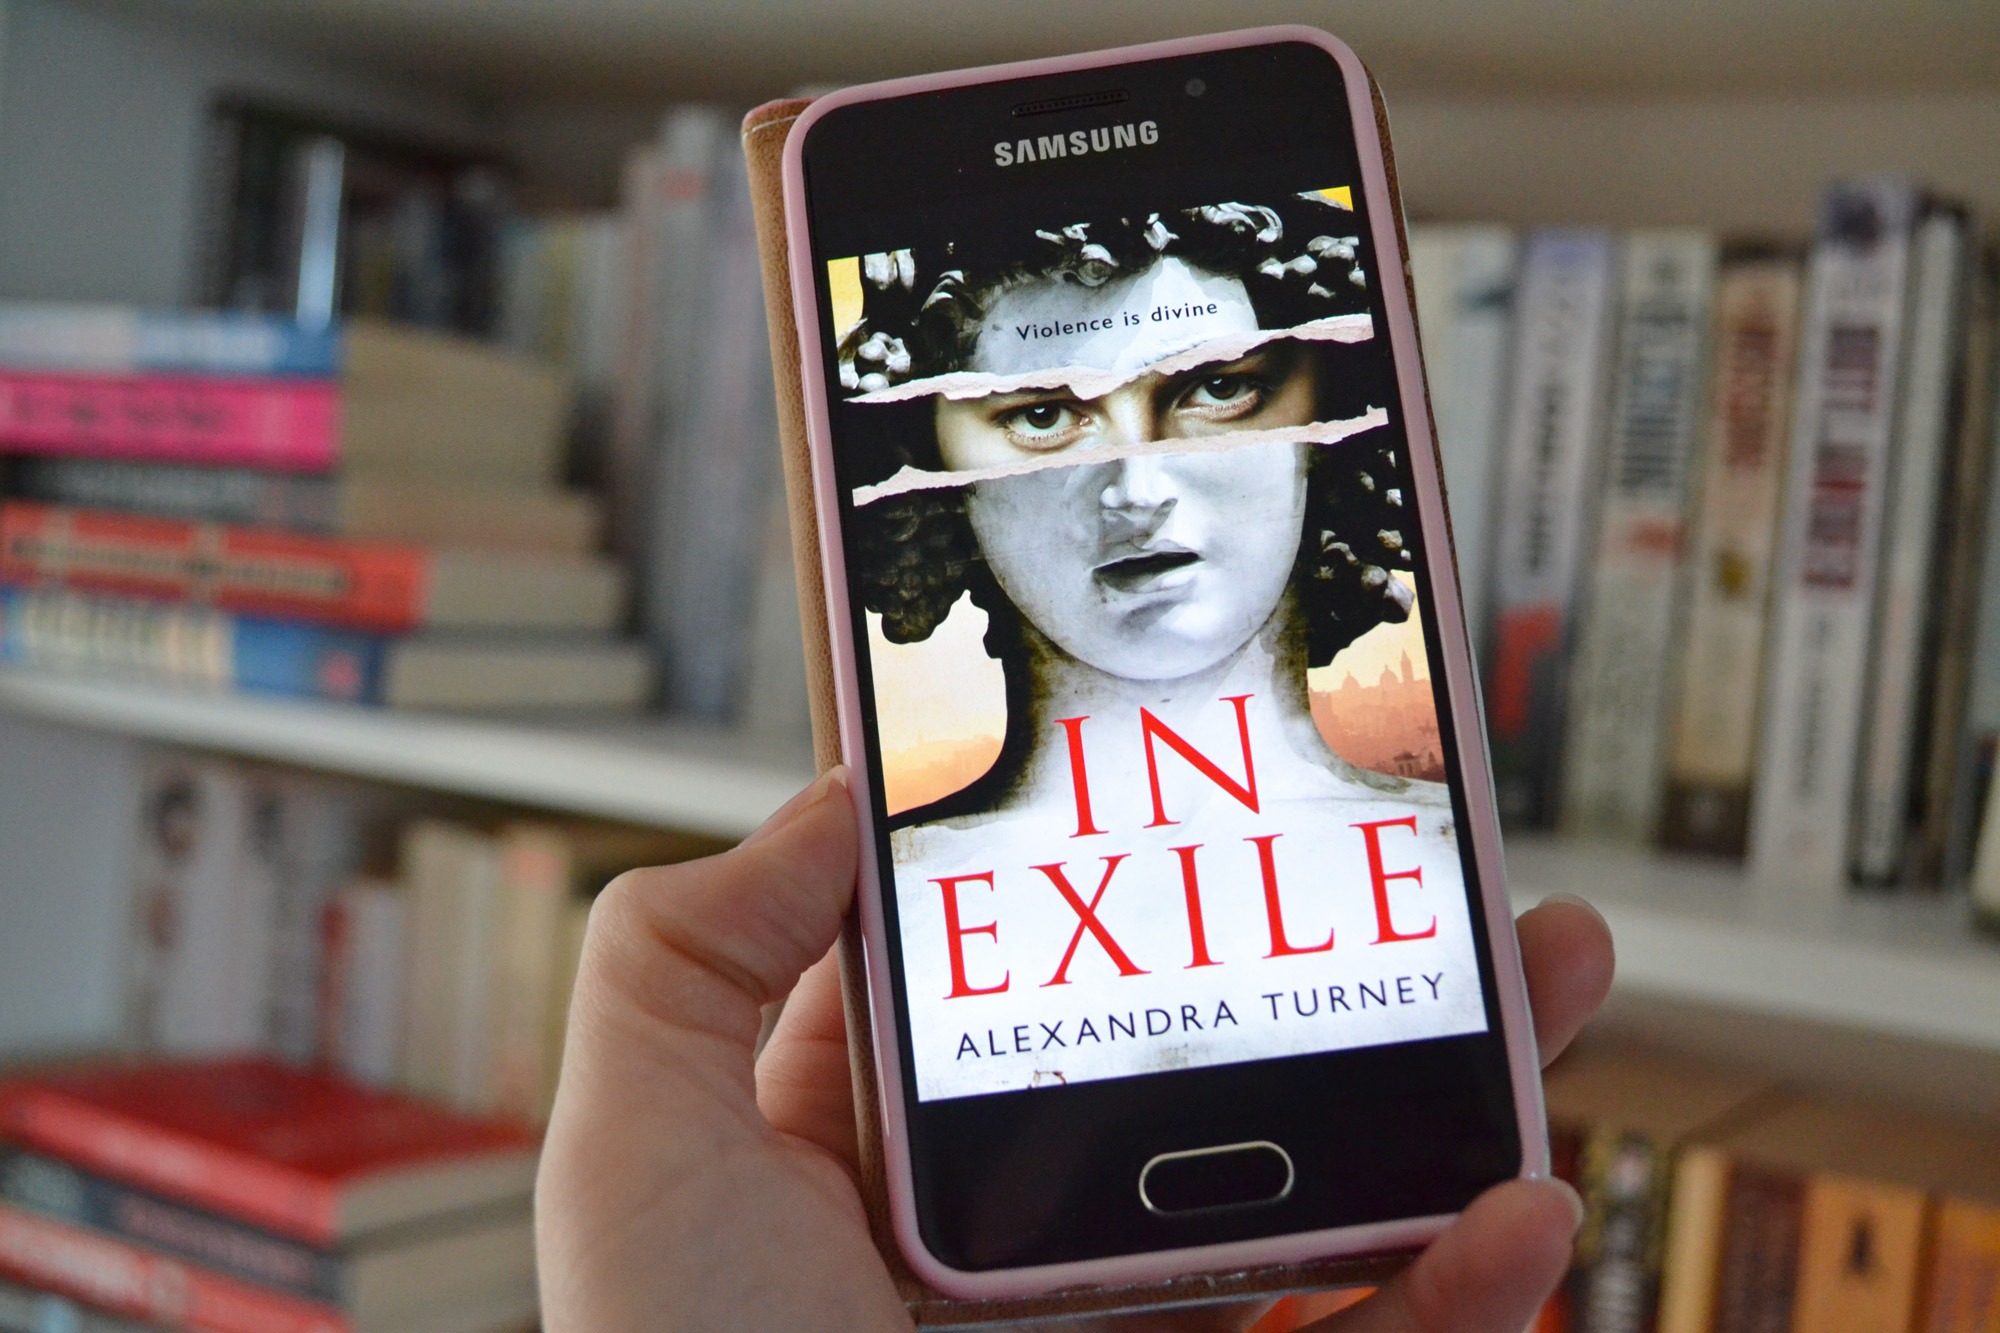 In Exile by Alexandra Turney